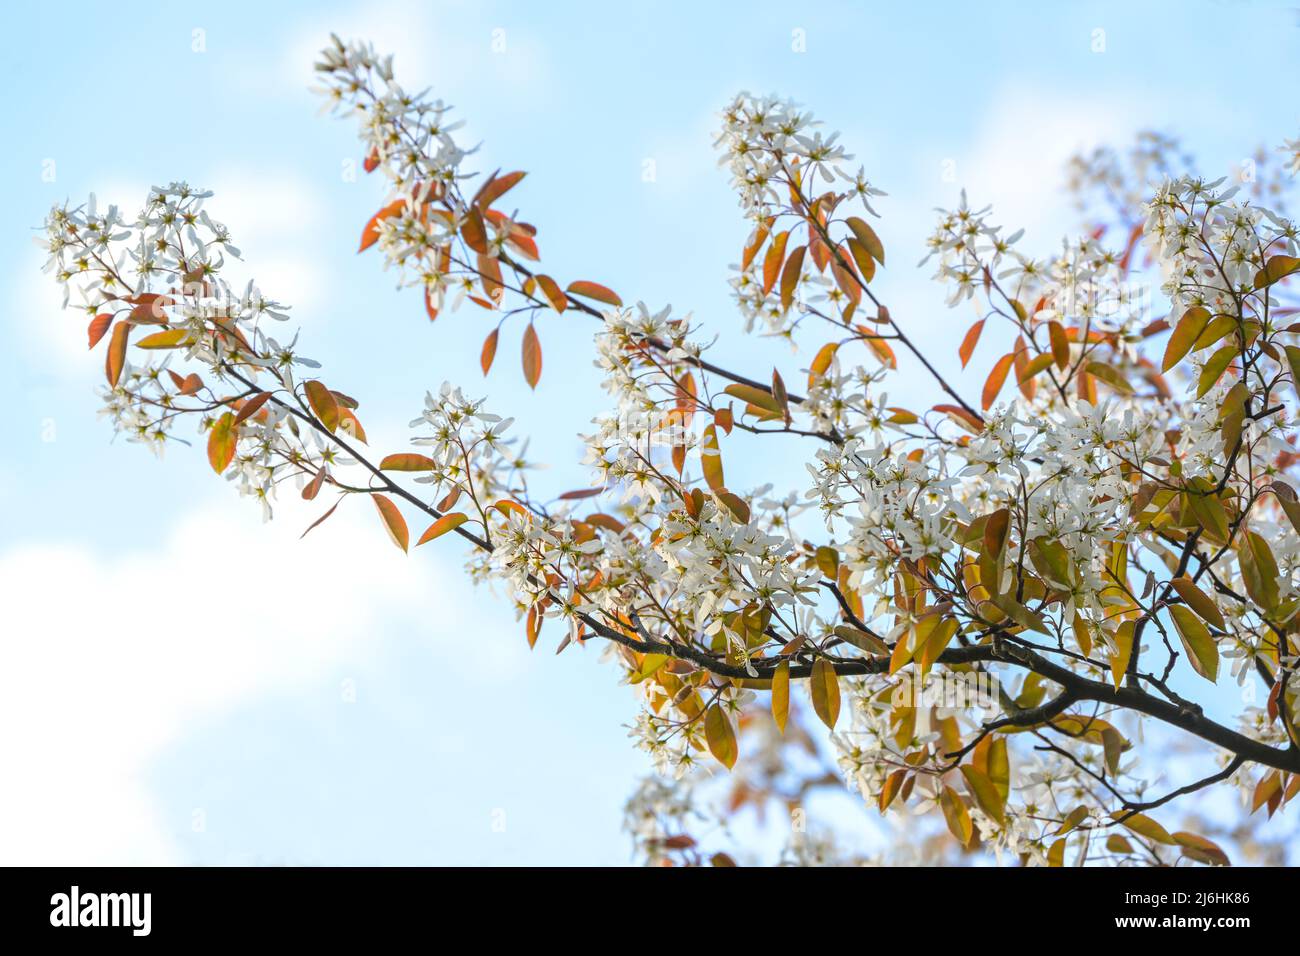 Amelanchier branch with white flowers and copper colored foliage against a blue sky with clouds in spring, copy space, selected focus, narrow depth of Stock Photo